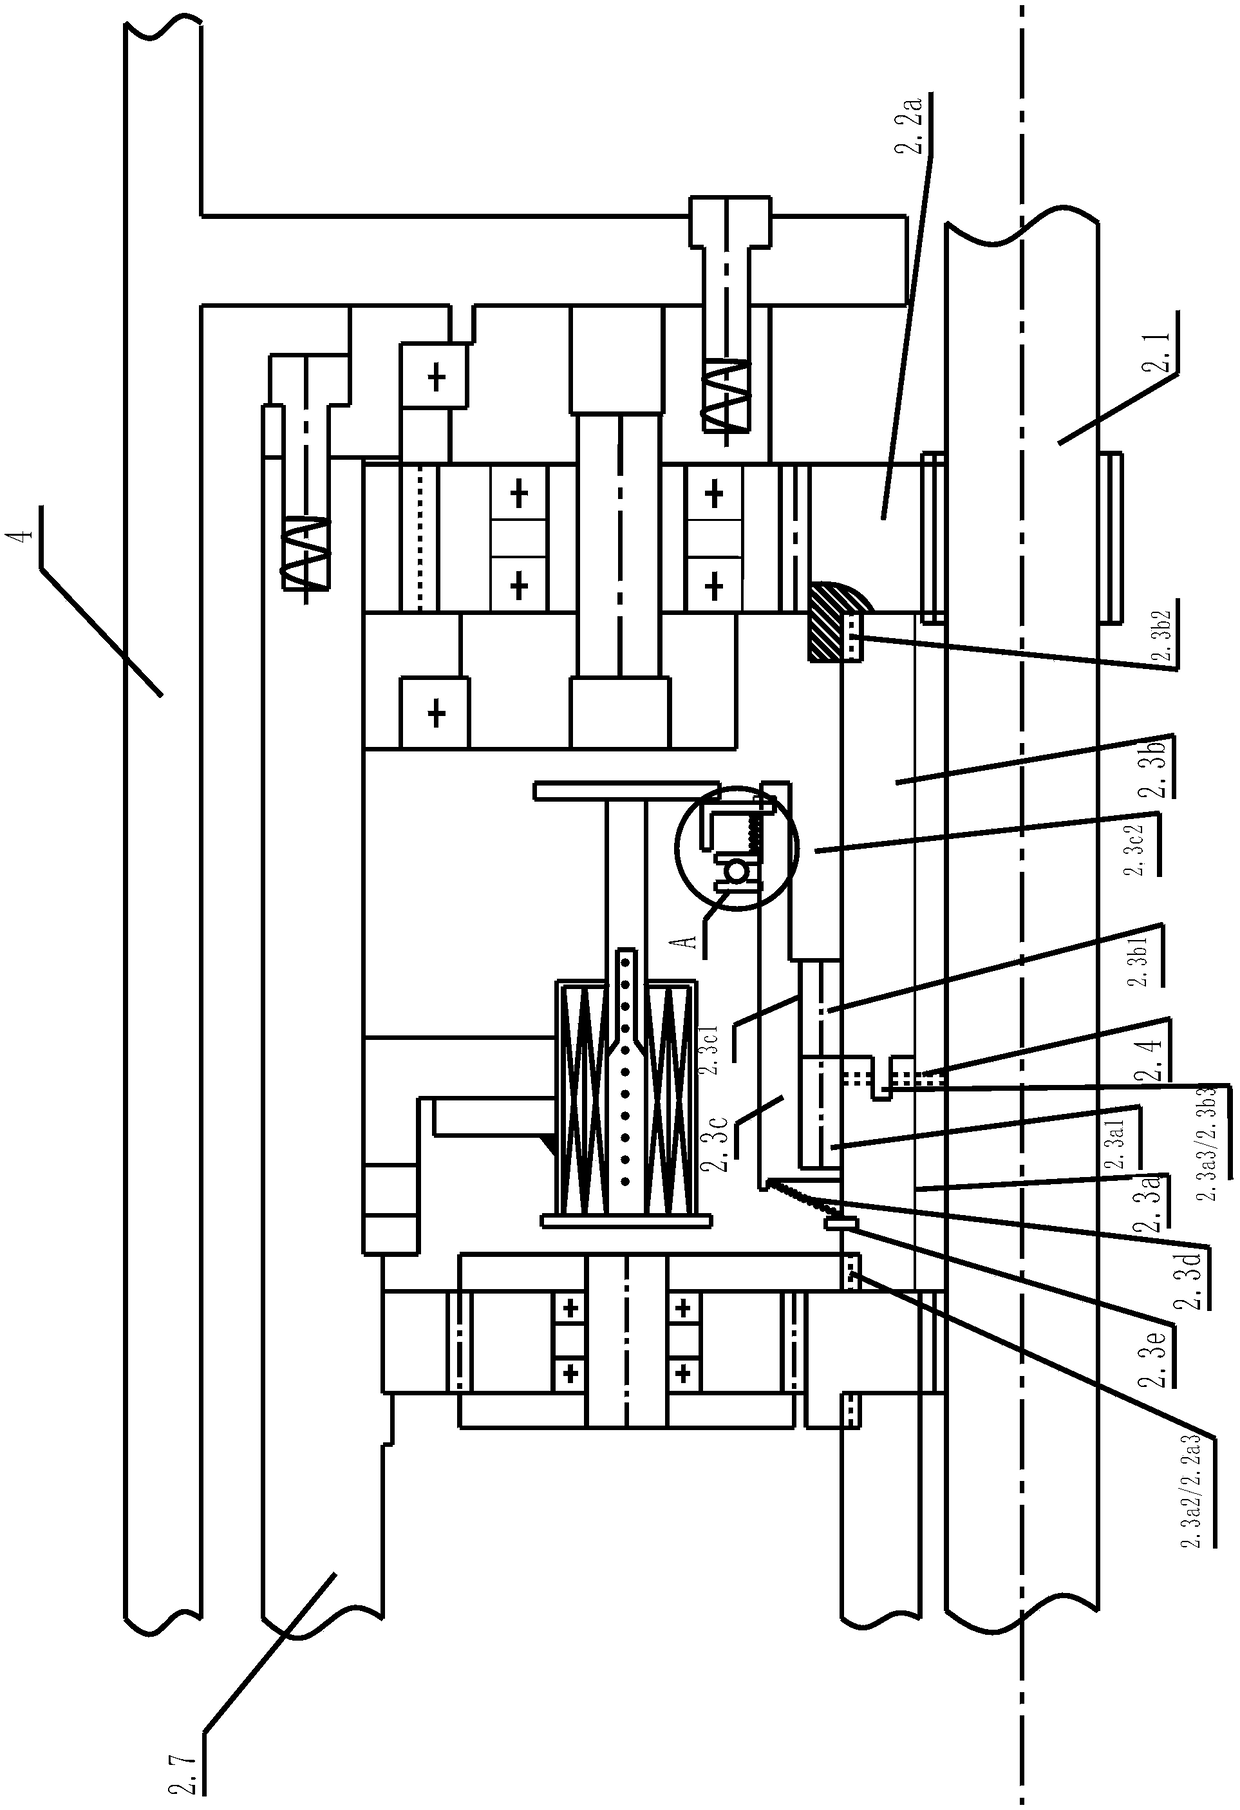 Planetary gear transmission with automatic gear shifting and hoist installed with the transmission